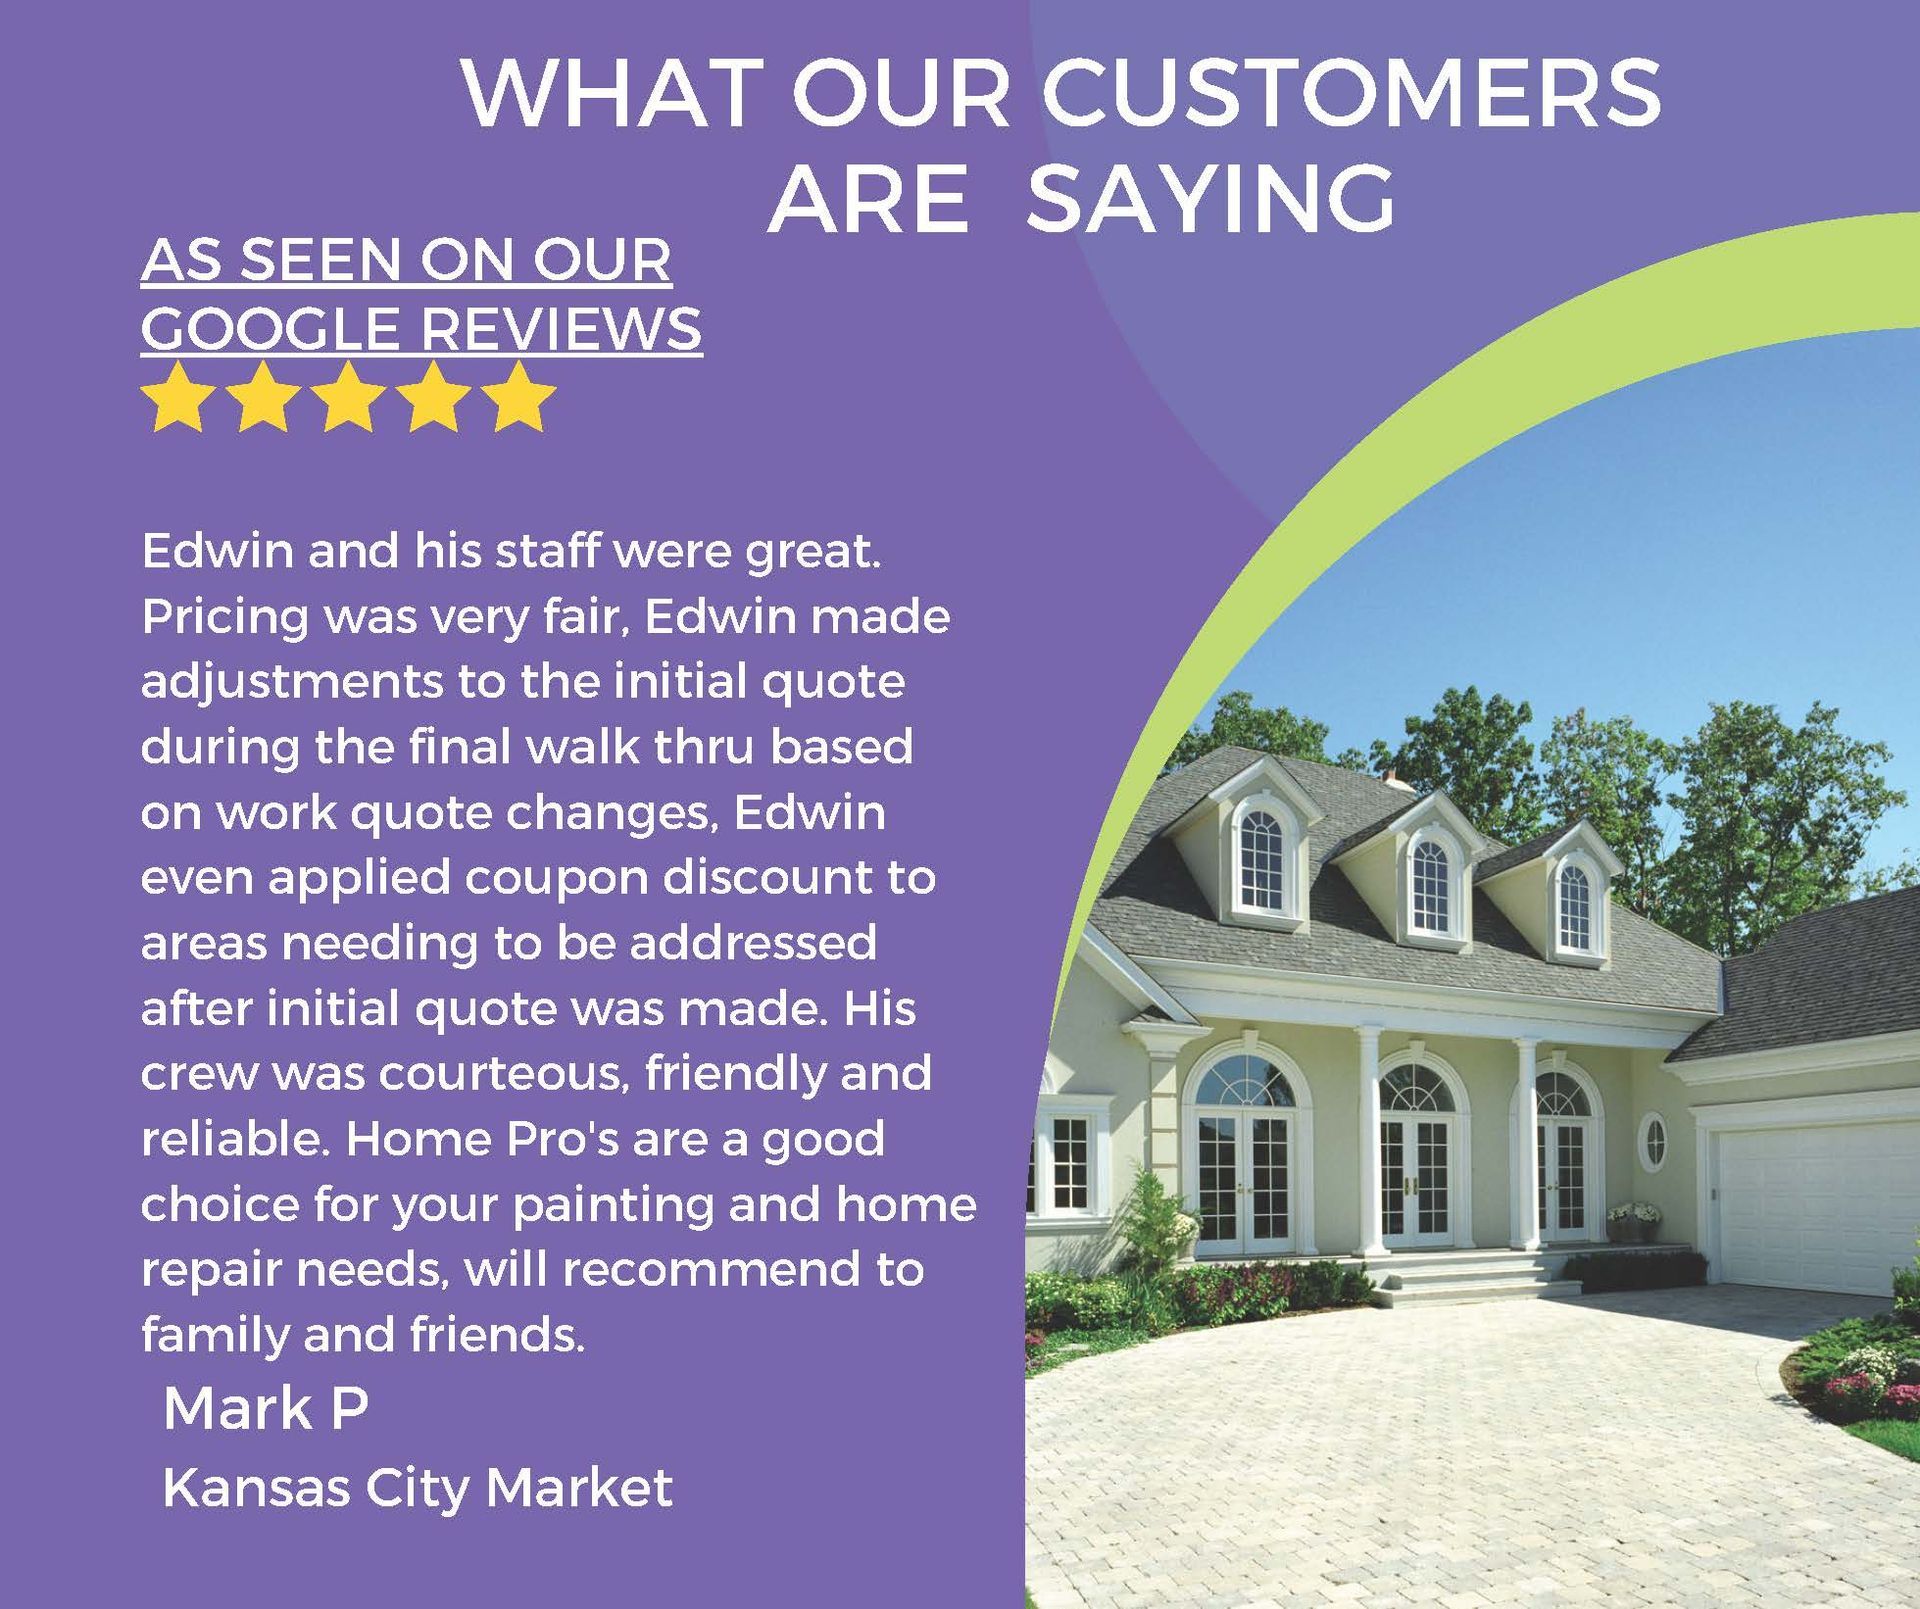 google review left by mark p of kansas city mo for home pros repairs fair pricing, courteous crew, reliable